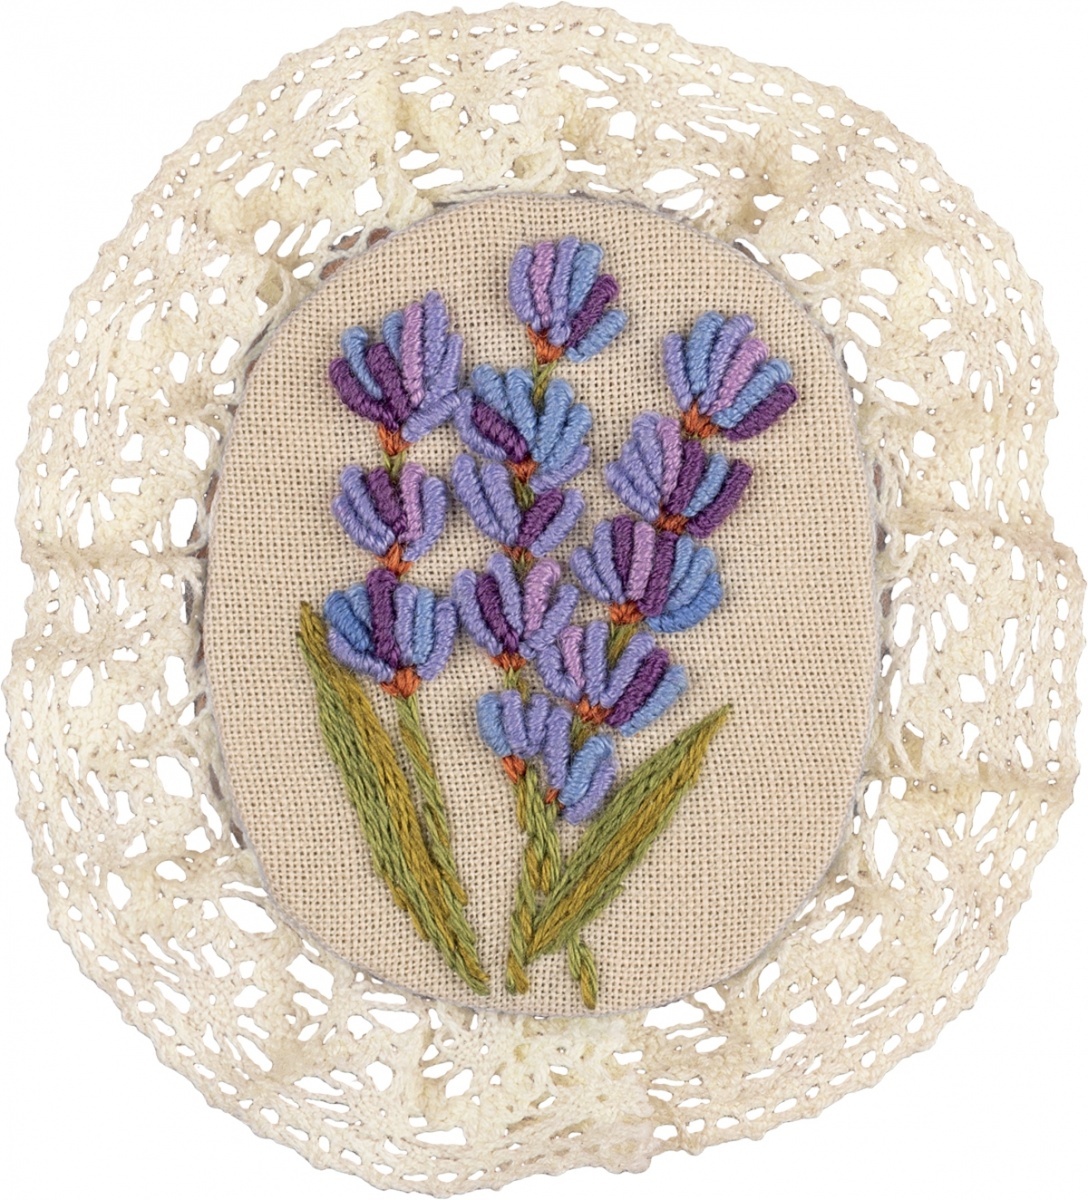 Vintage Brooches. Fennel and Lavender Embroidery Kit фото 7